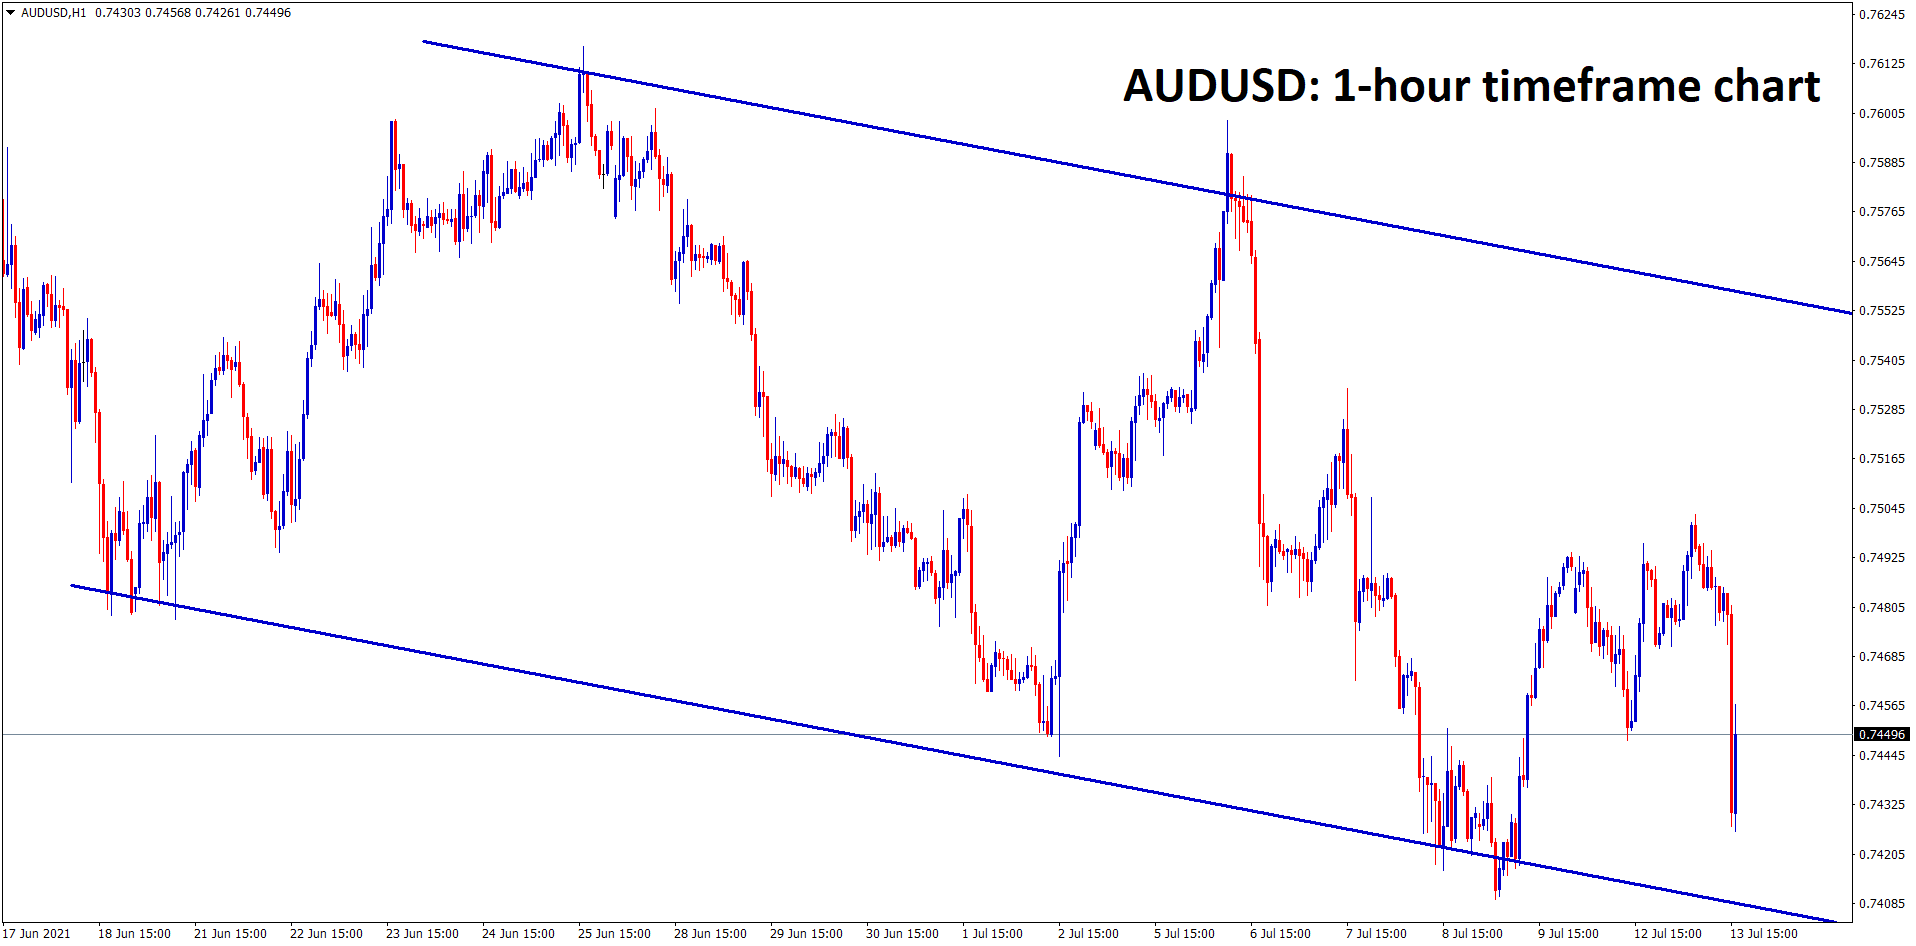 AUDUSD is moving in a downtrend price range